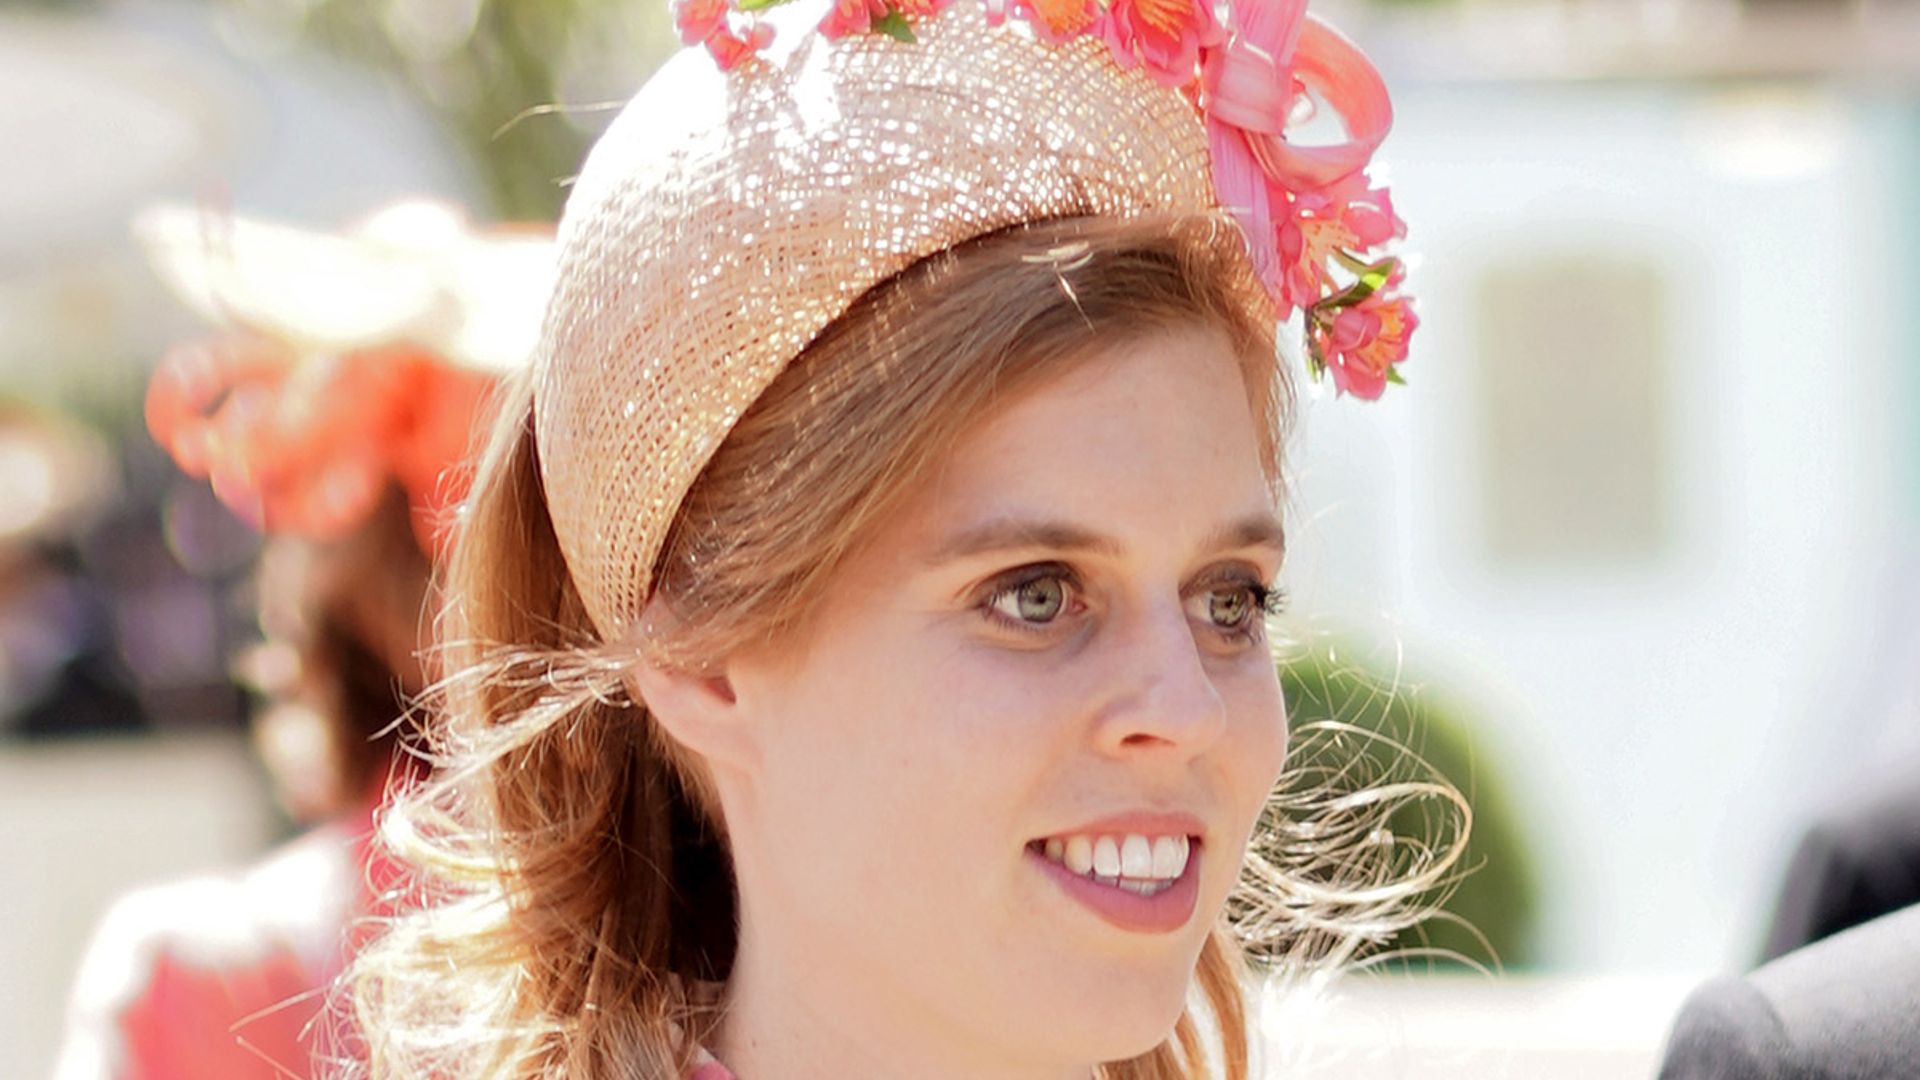 Love Princess Beatrice's £3.9k sequin dress? You need to see the back